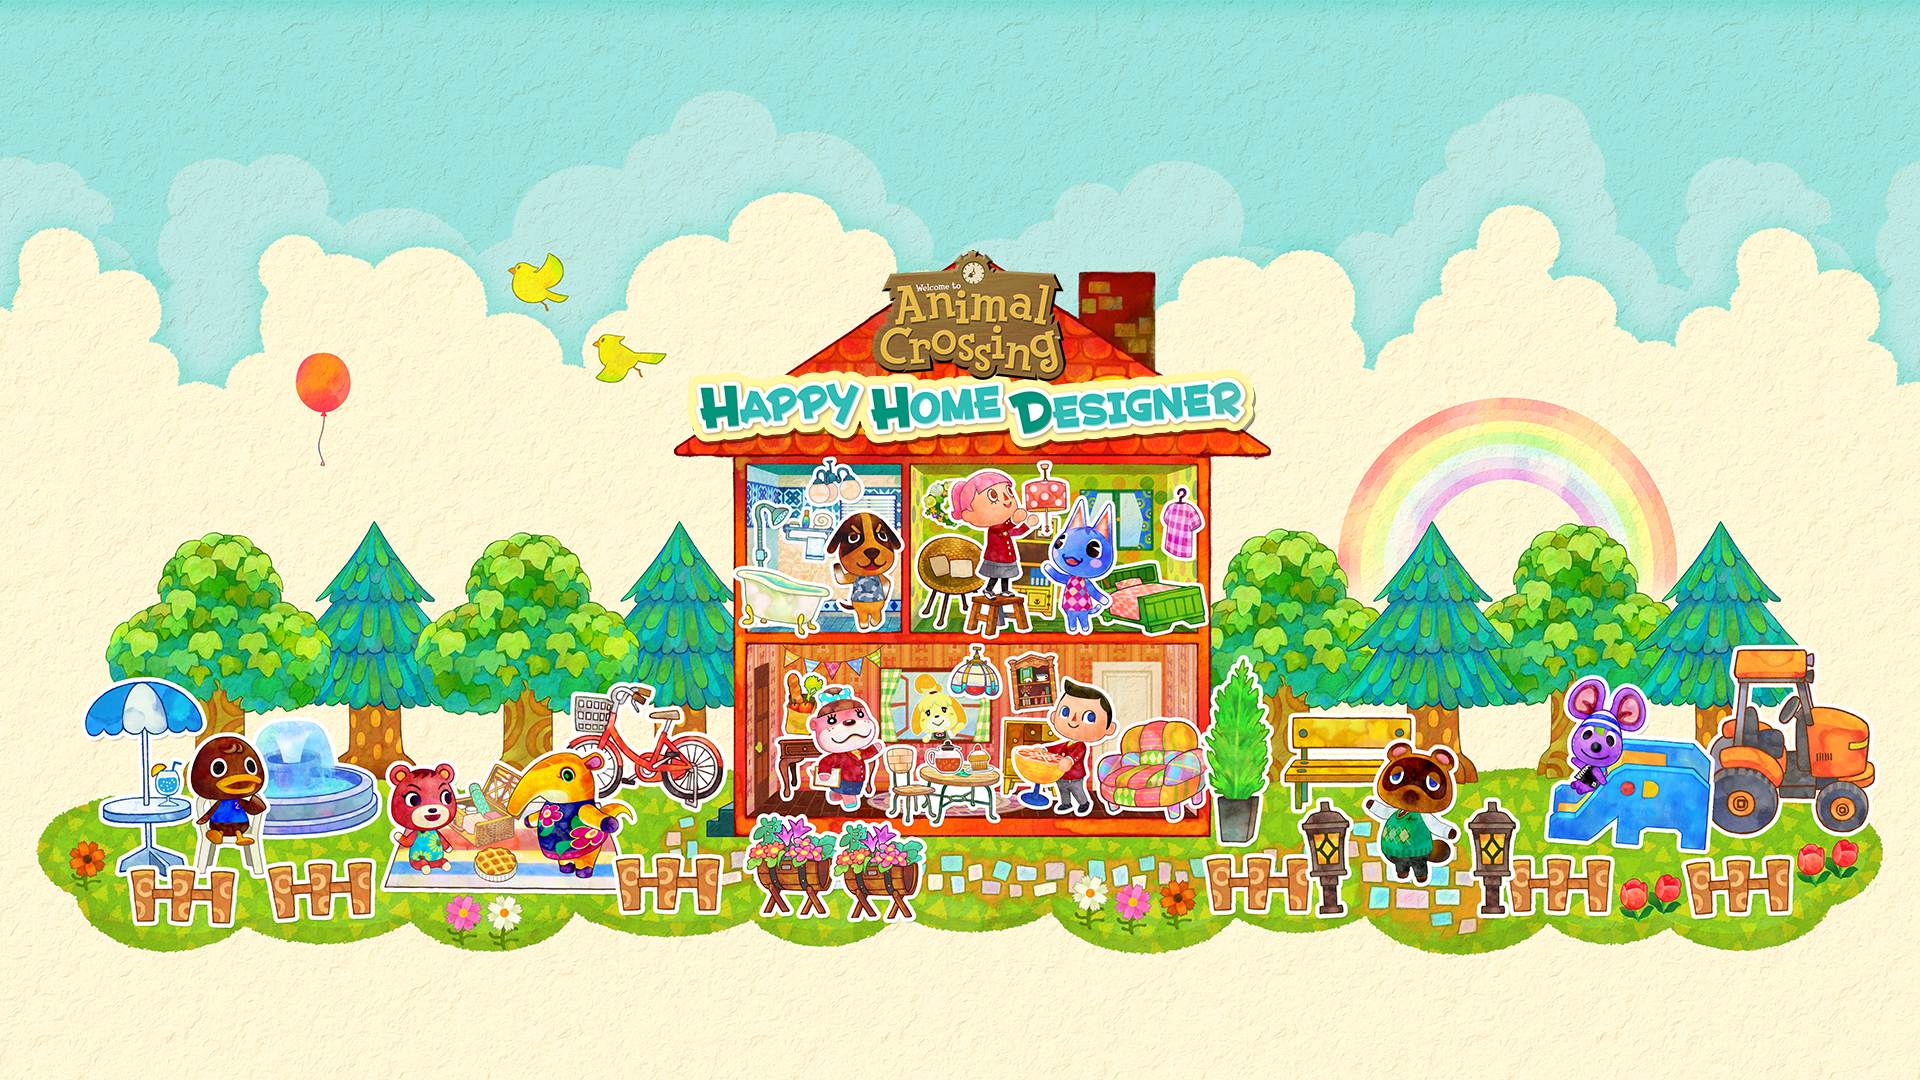 Video Game Animal Crossing: Happy Home Designer HD Wallpaper | Background Image